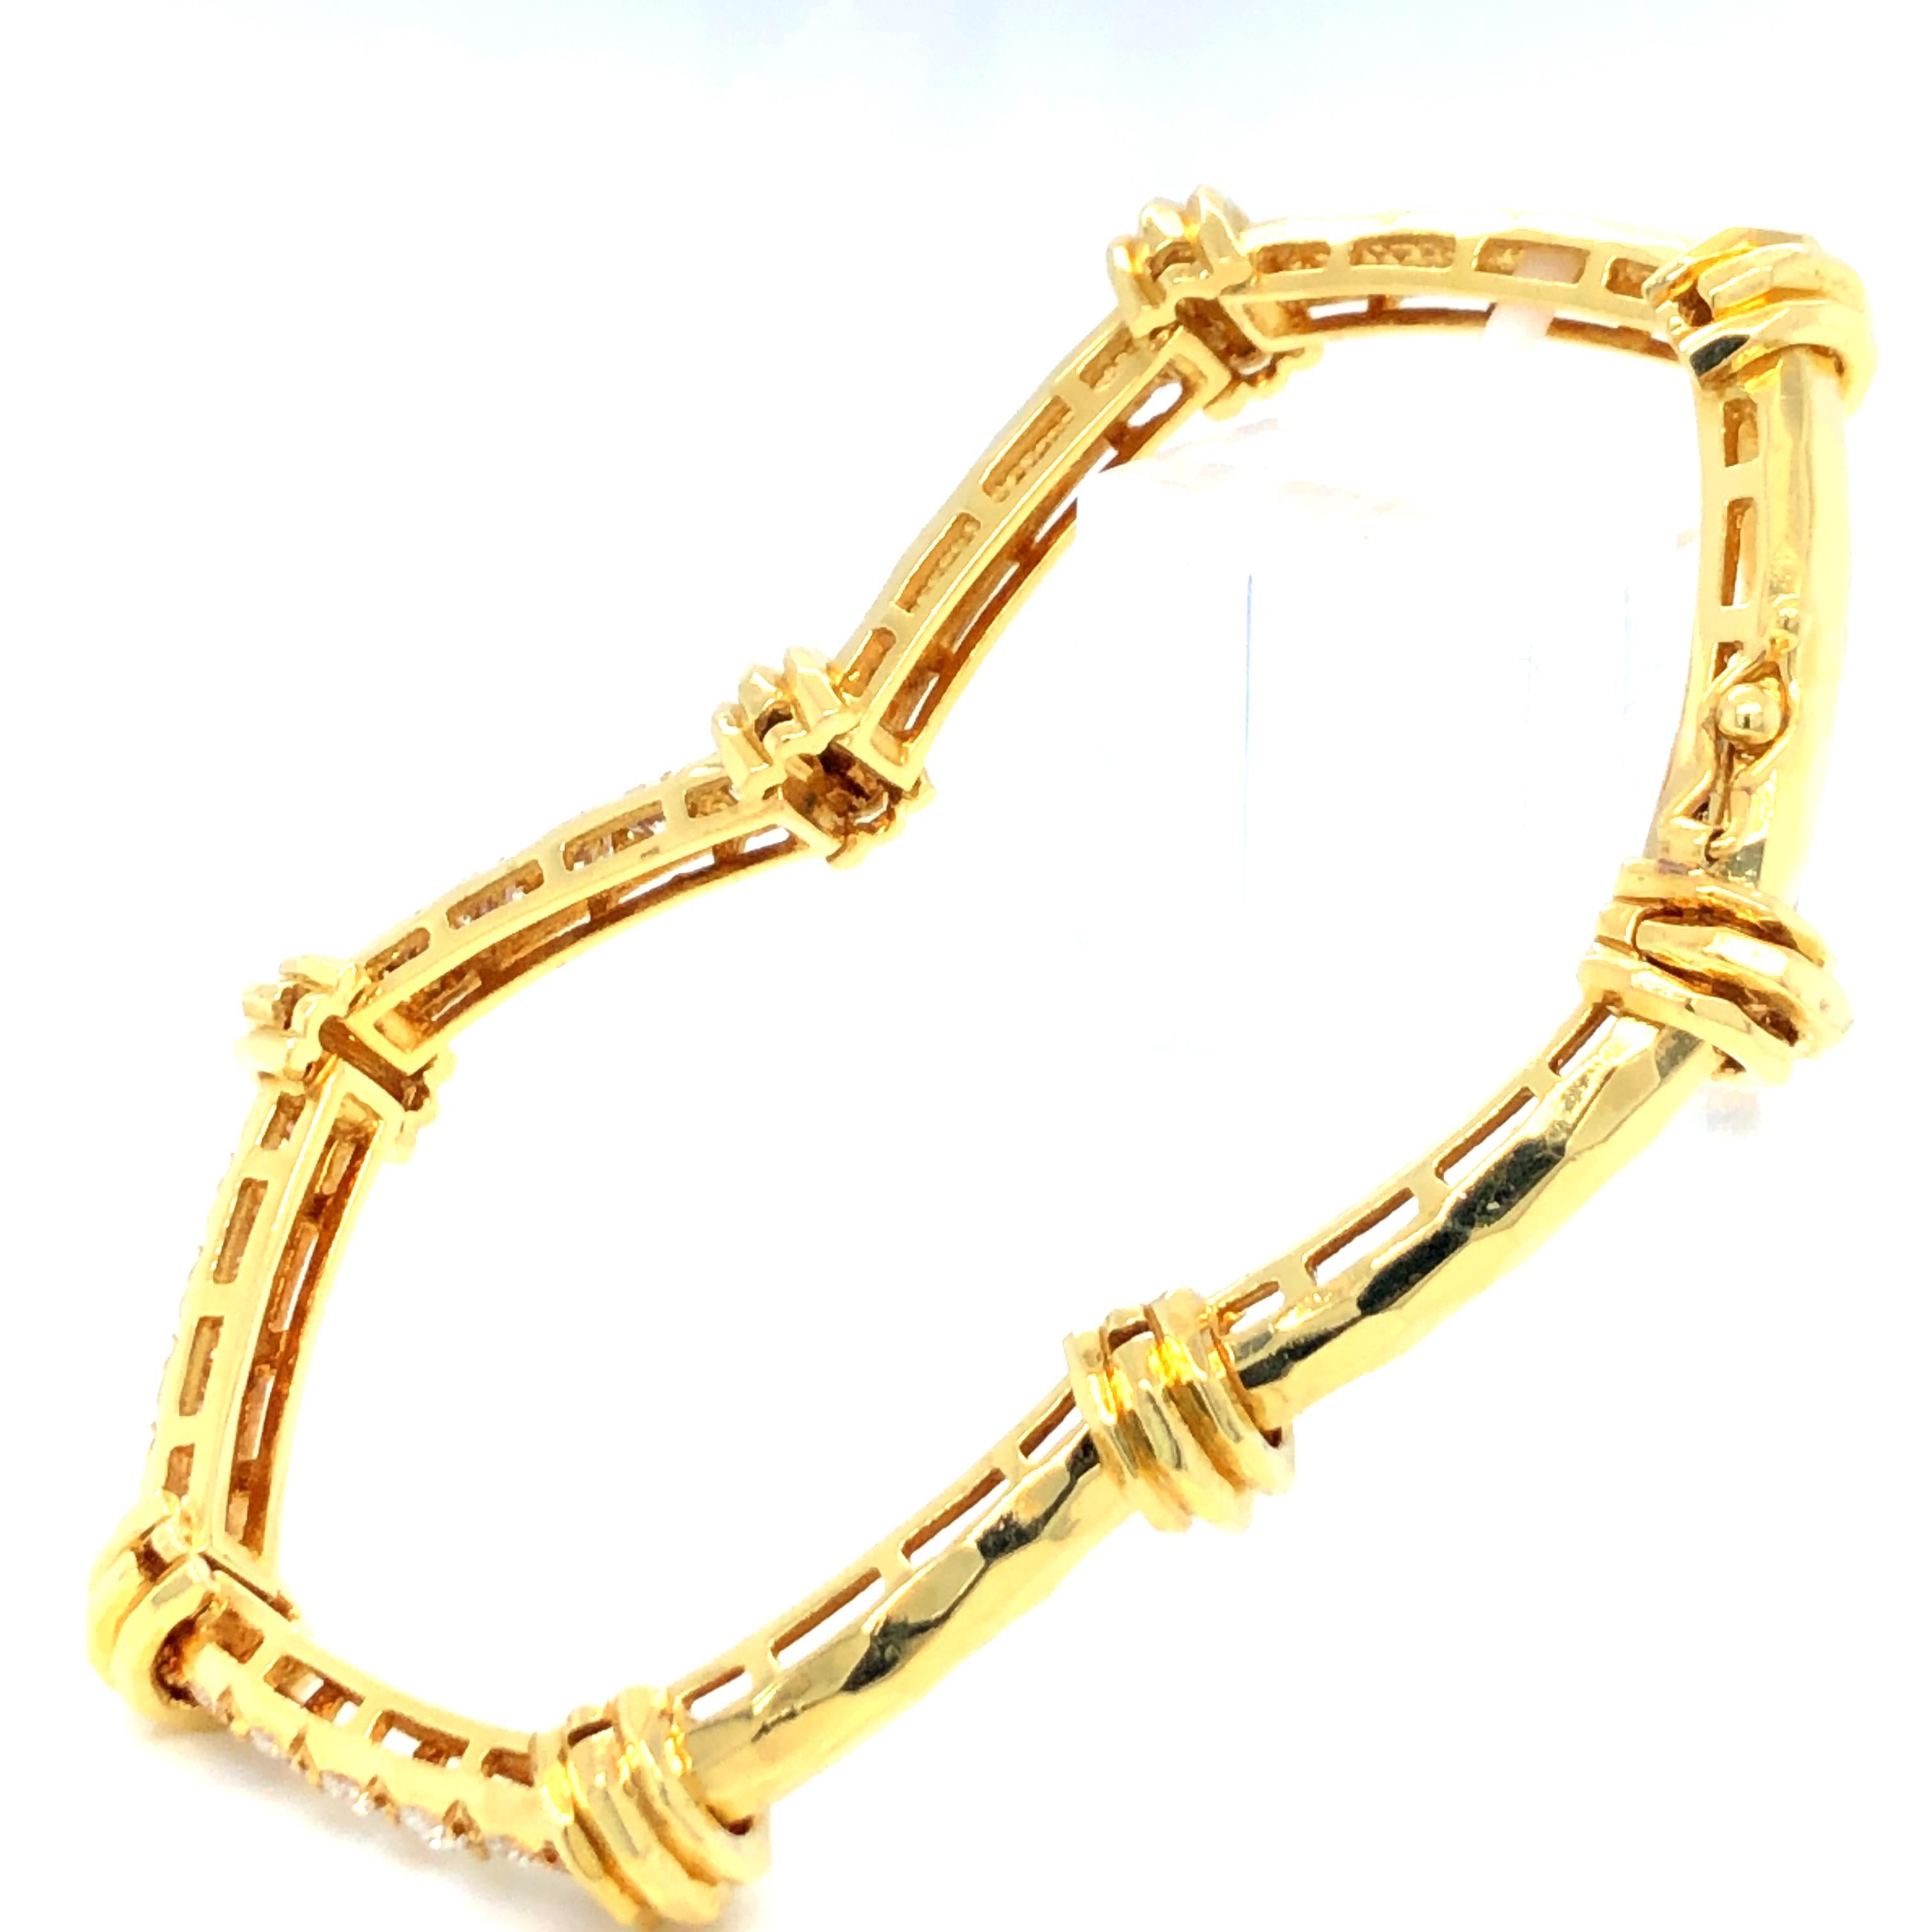 Estate Henry Dunay Diamond Bamboo Bracelet in 18K Yellow Gold. The bracelet features approximately 2ctw of brilliant cut round diamonds. 
7